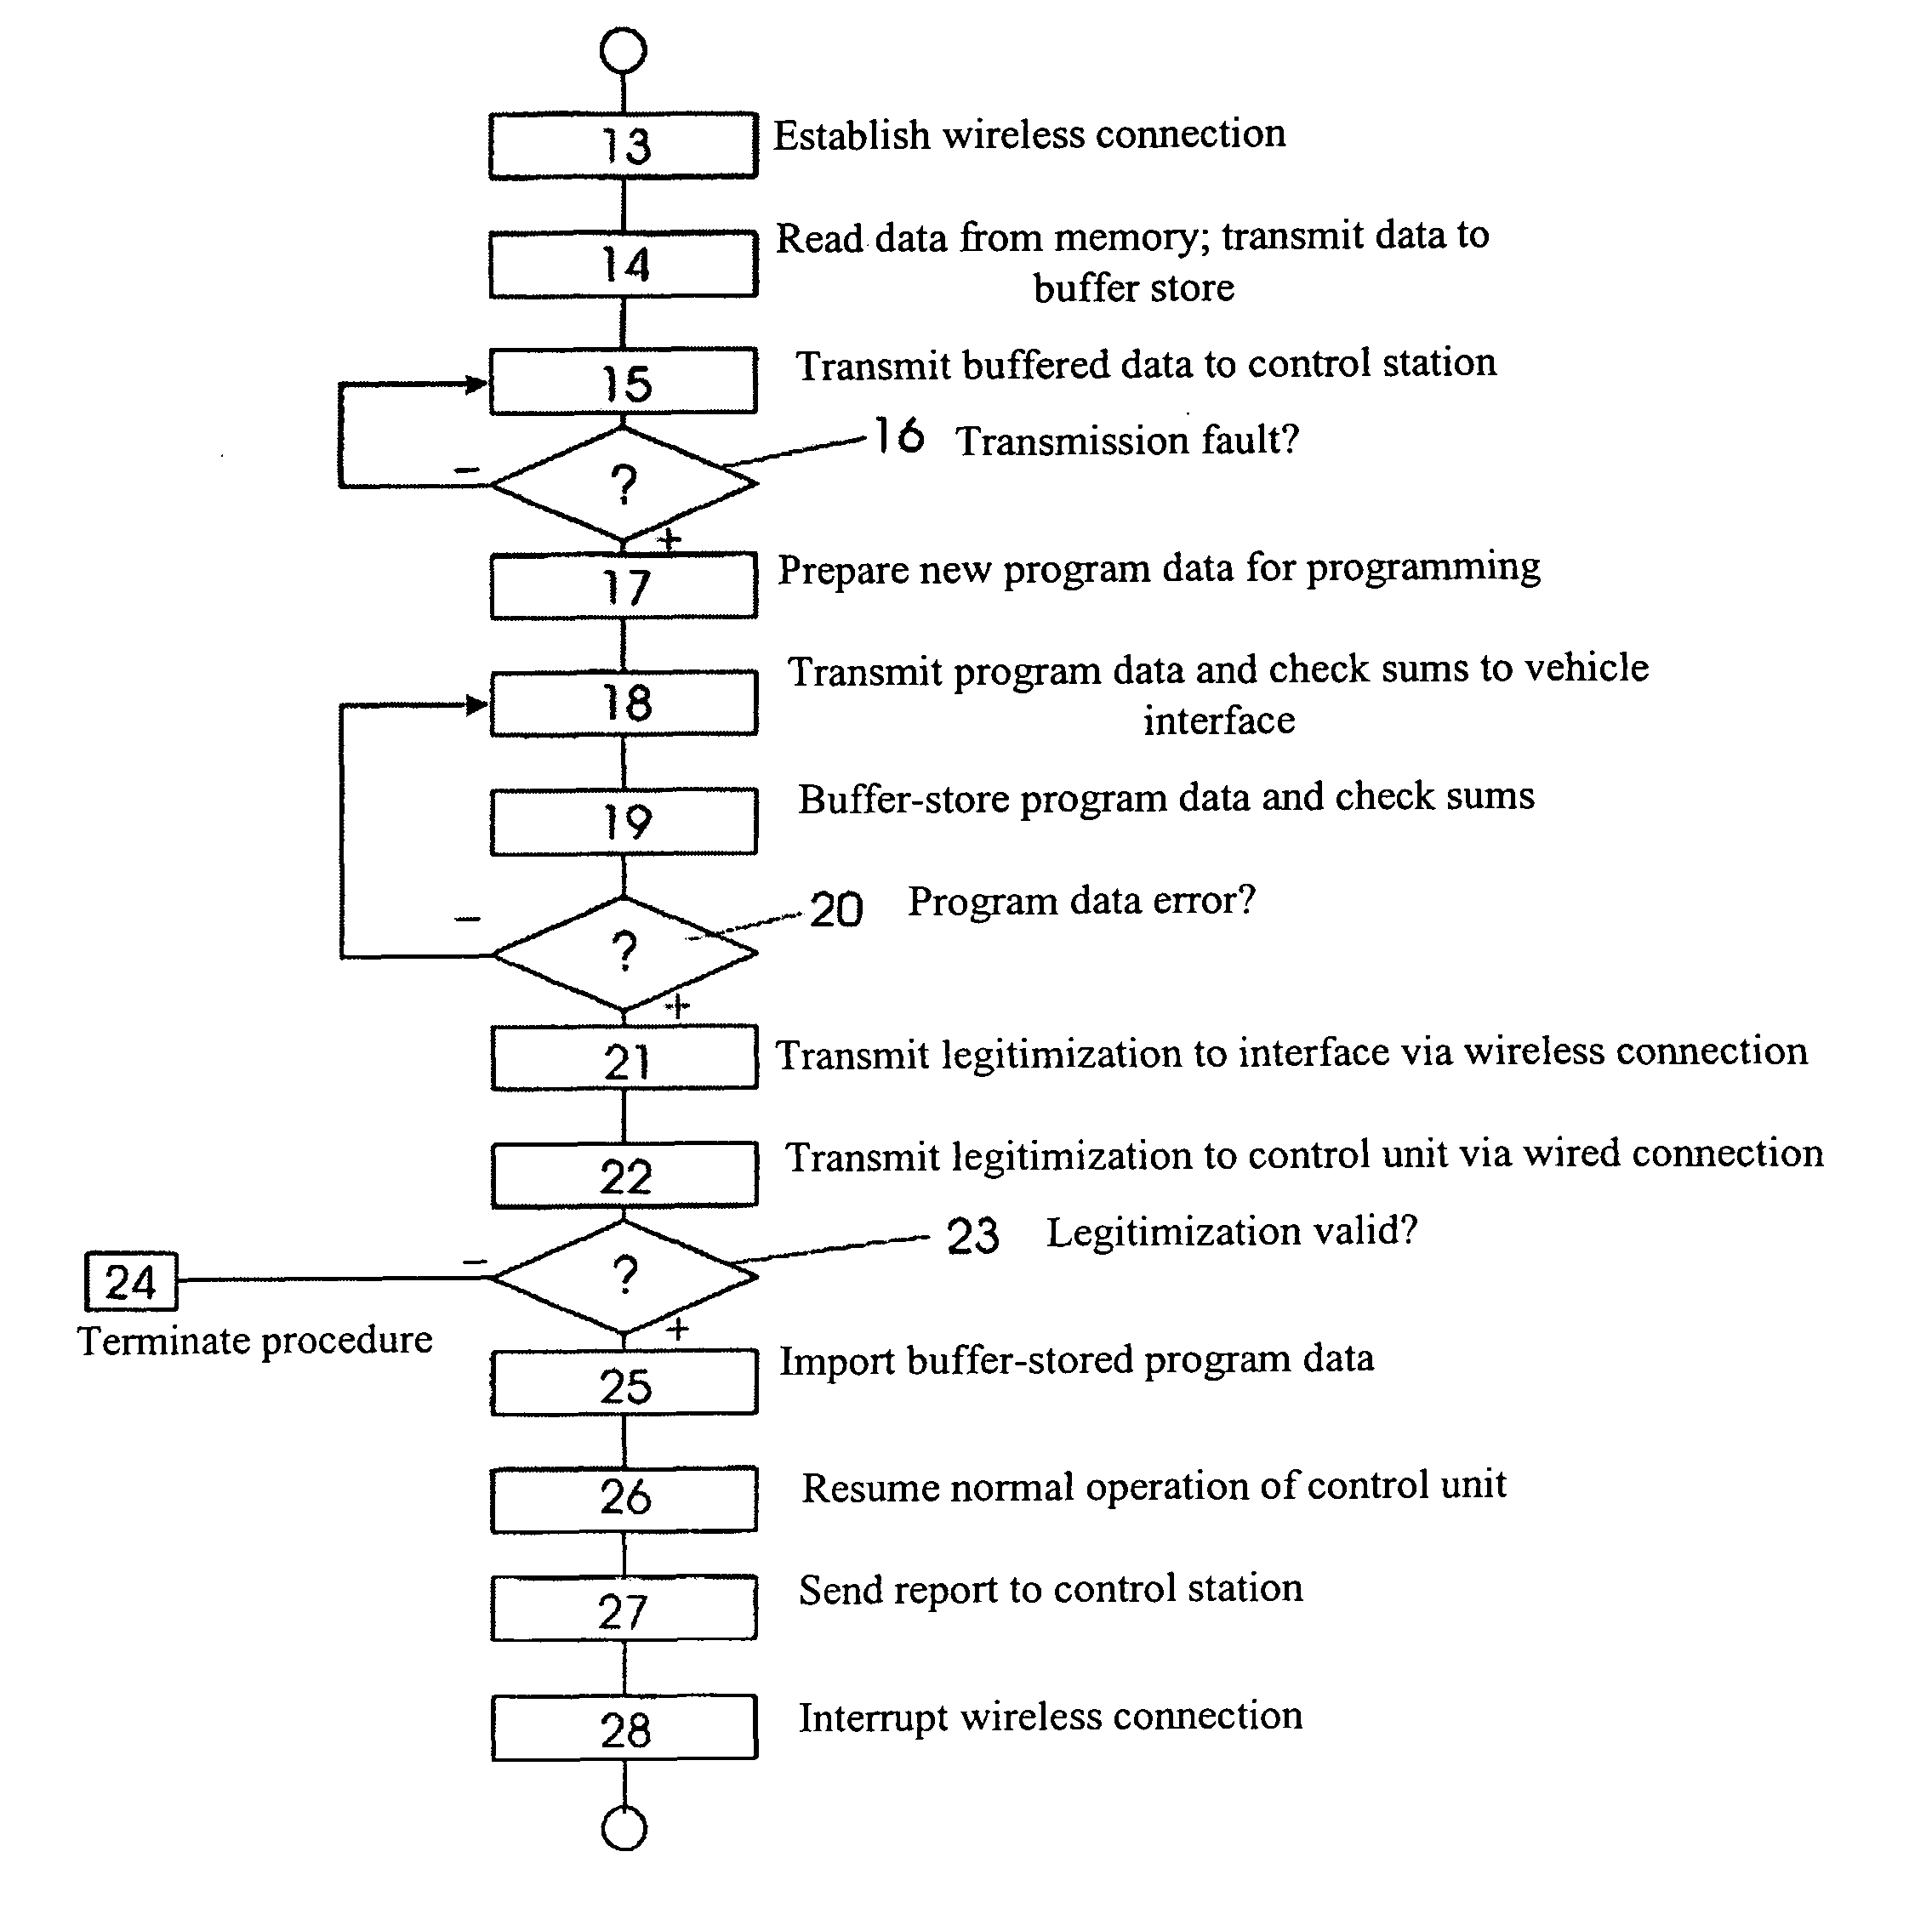 Method and system for remote programming of a program-controlled device using a legitimization code